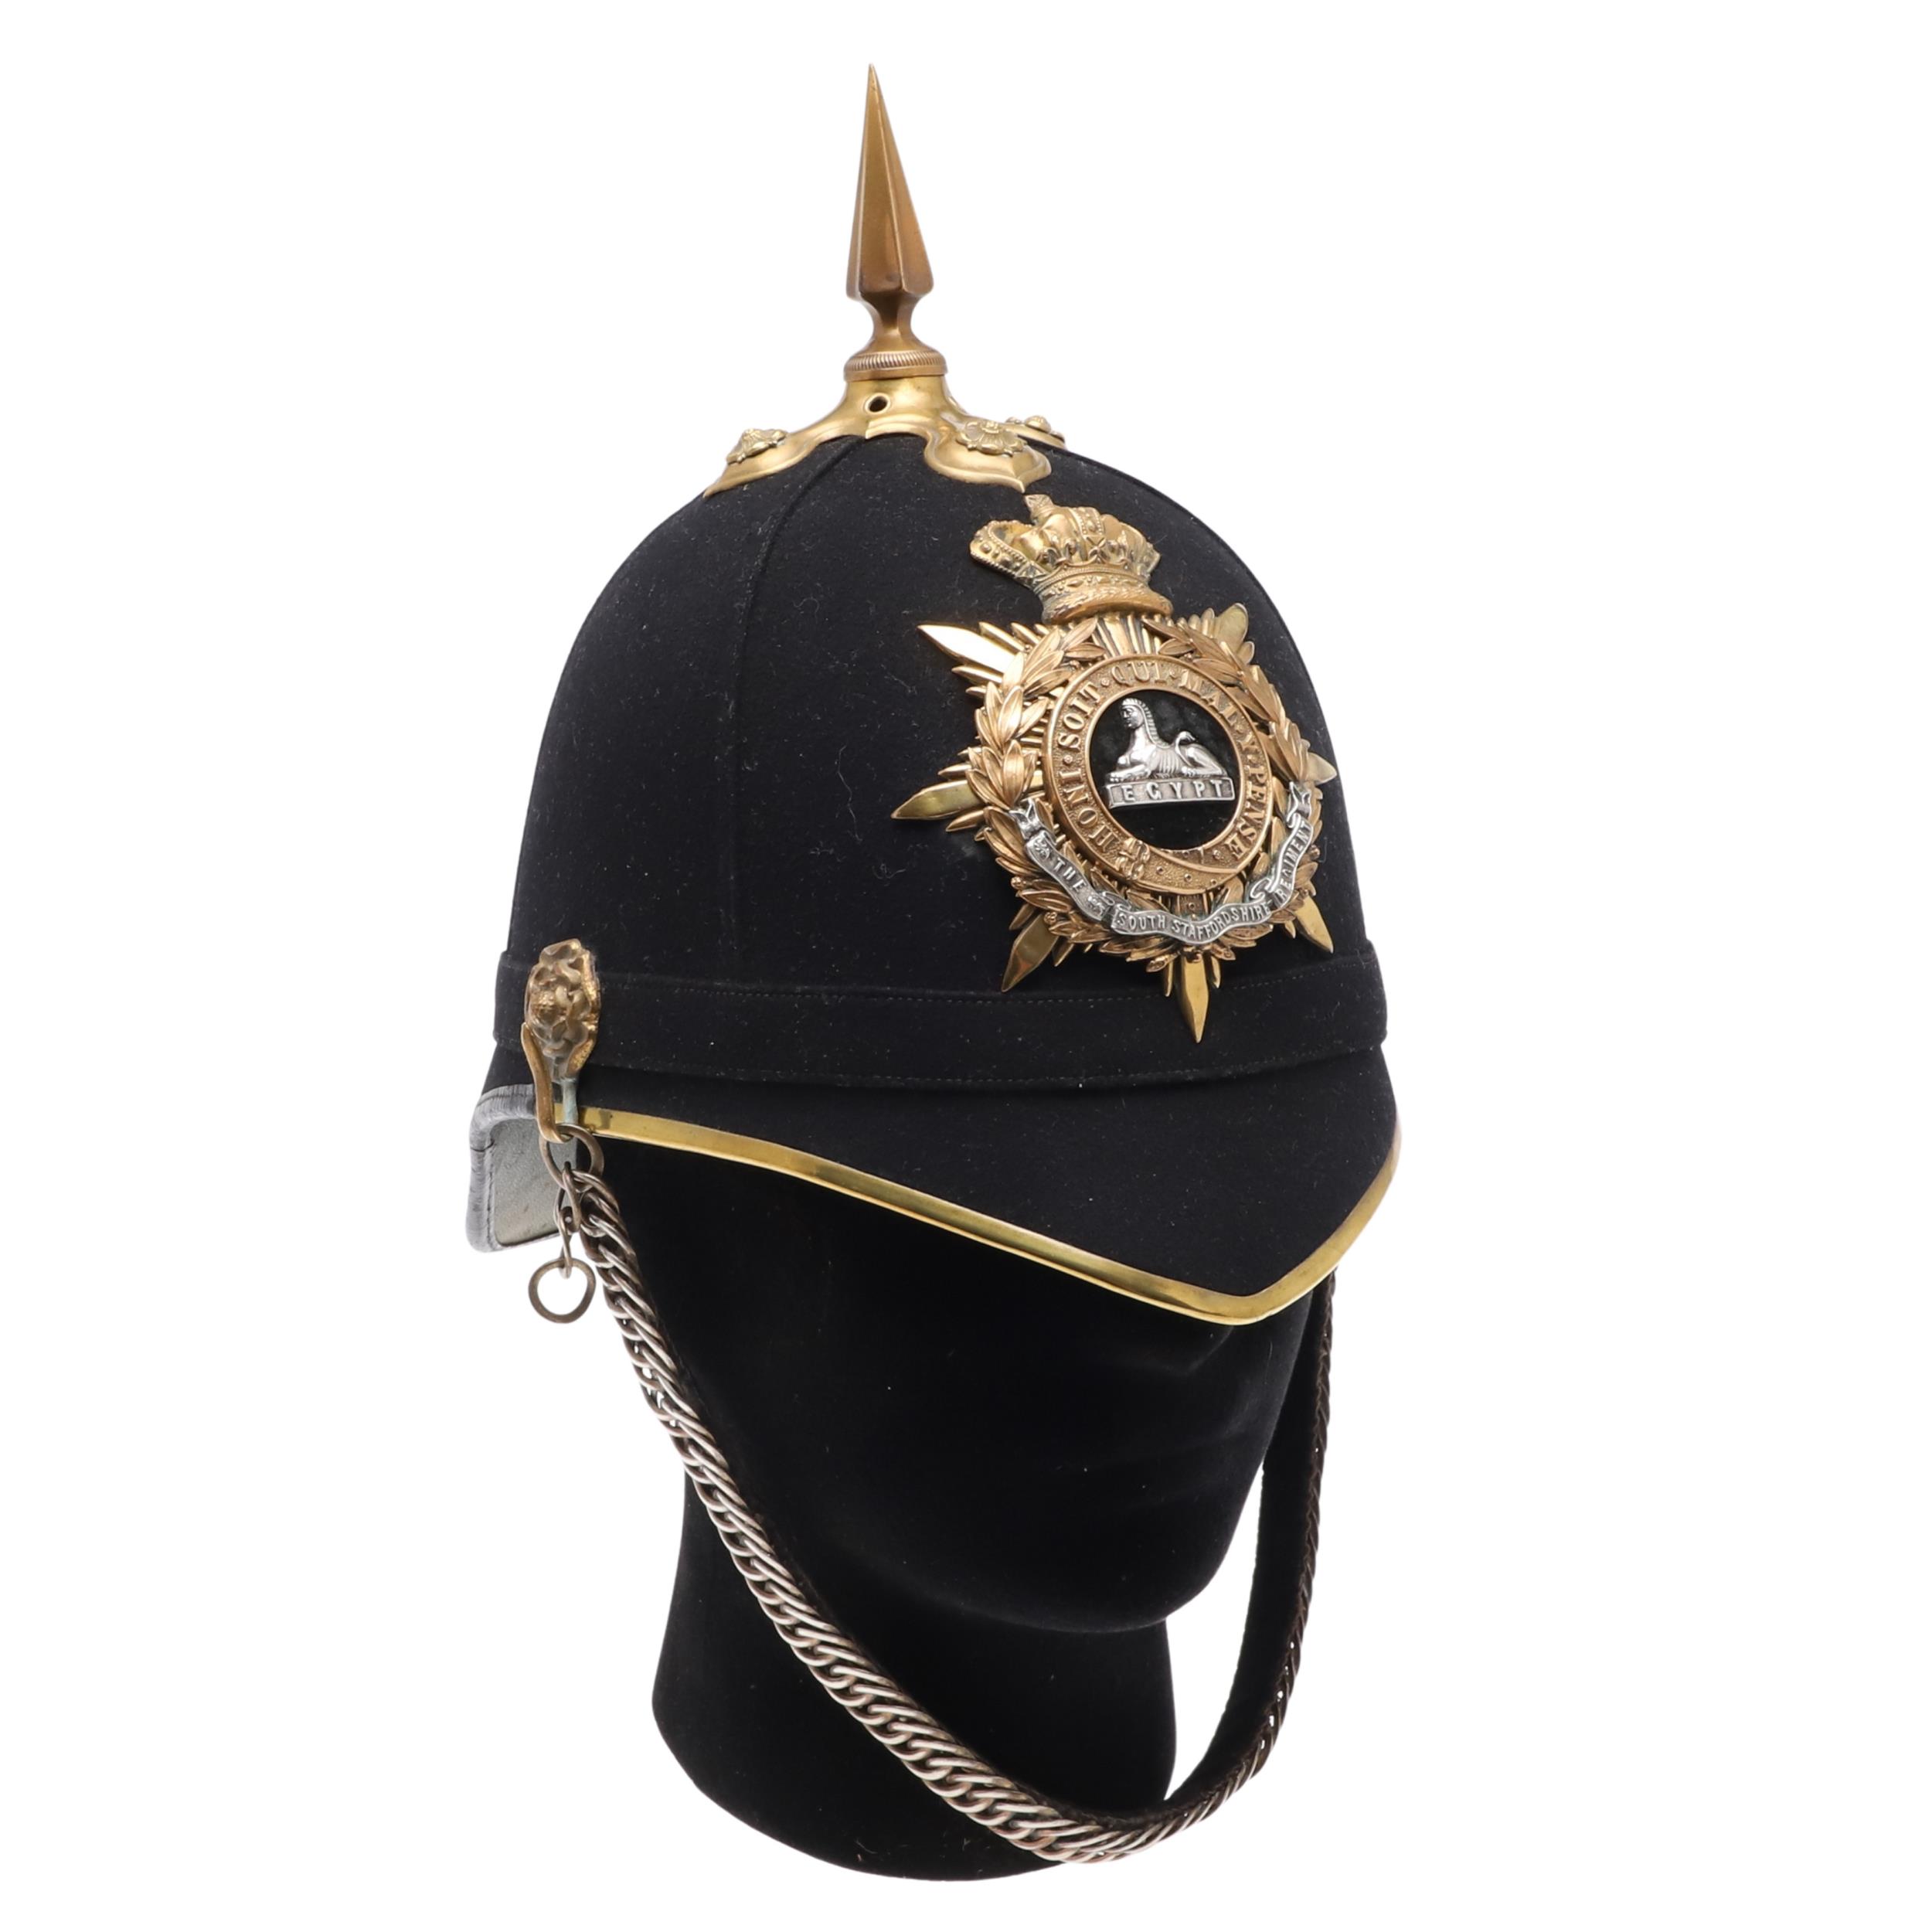 A SOUTH STAFFORDSHIRE REGIMENT OFFICER'S BLUE CLOTH HOME SERVICE HELMET.